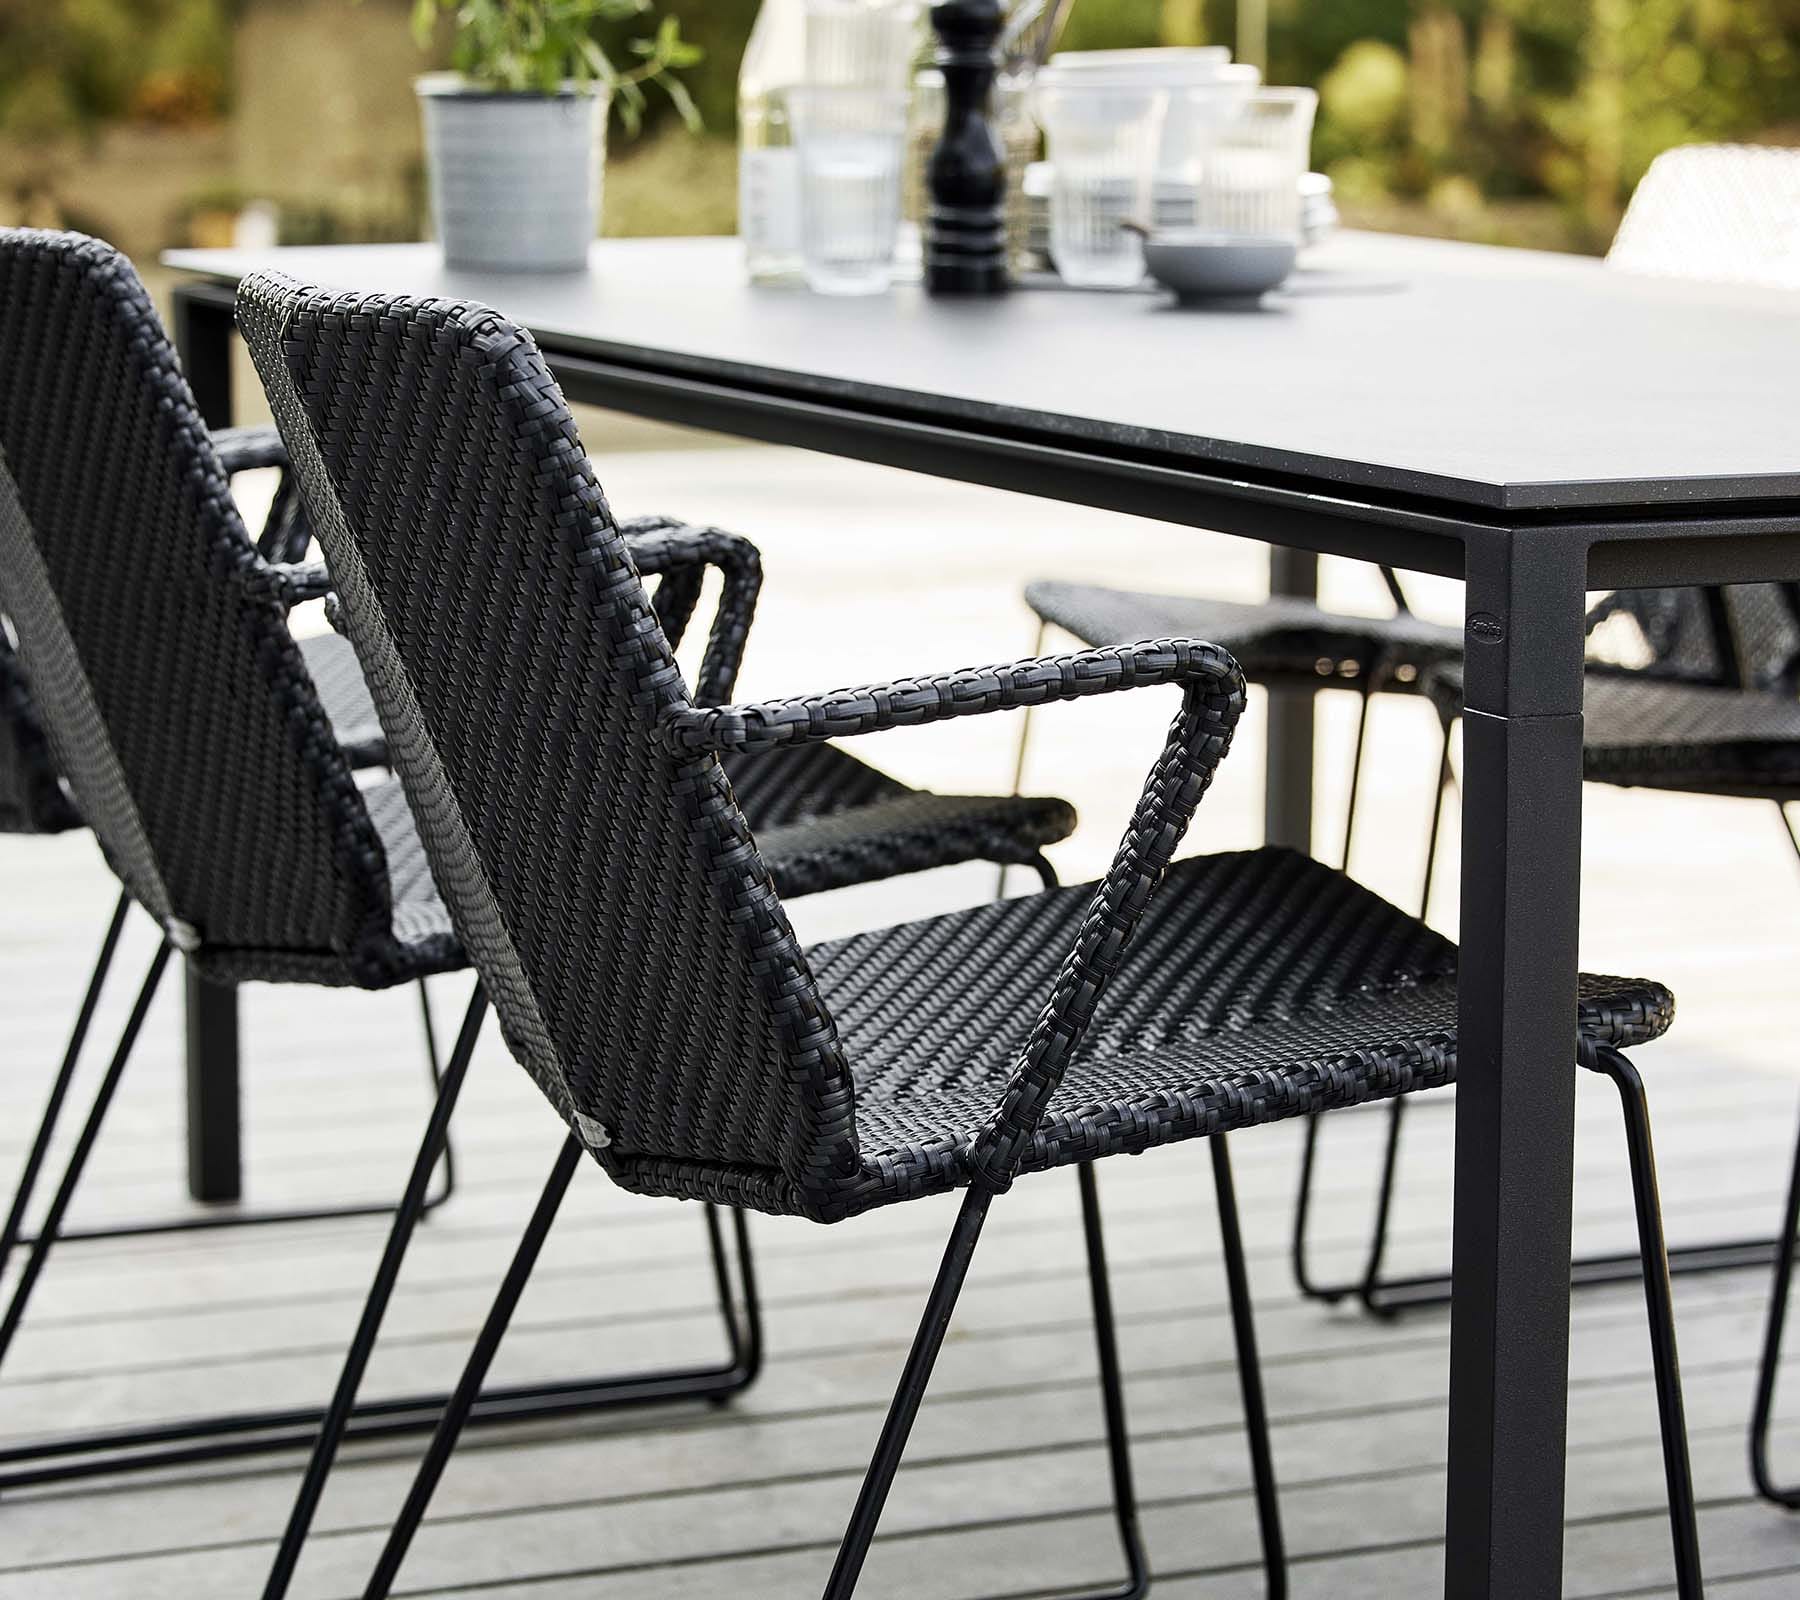 Boxhill's Vision black outdoor dining chair with dark grey outdoor dining table